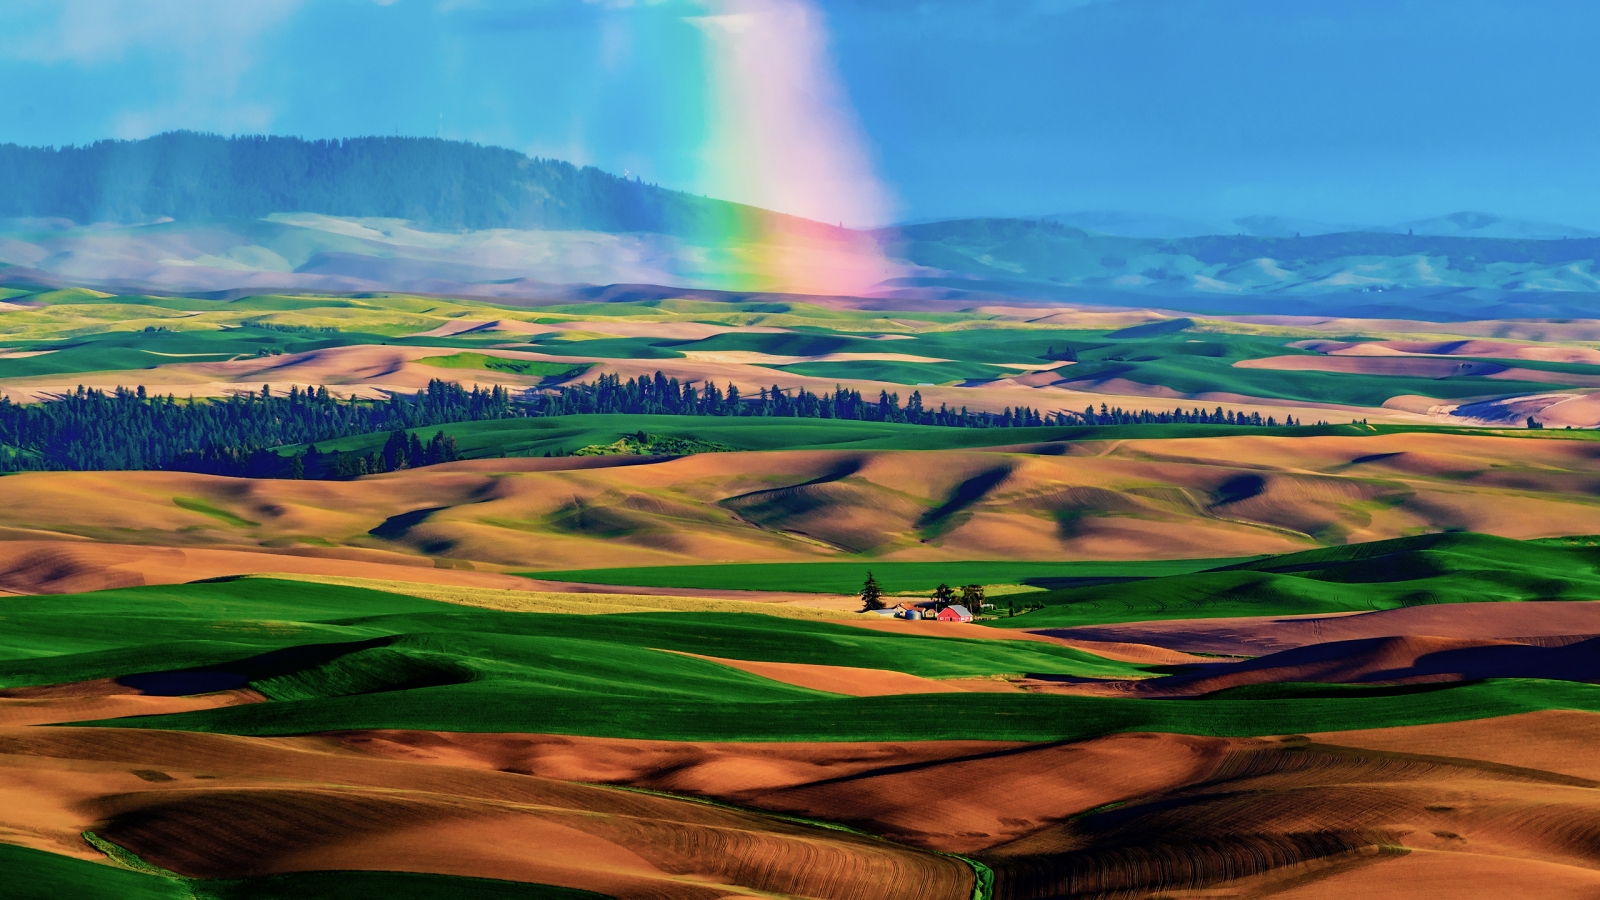 HDR Rainbow Landscape for 1600 x 900 HDTV resolution